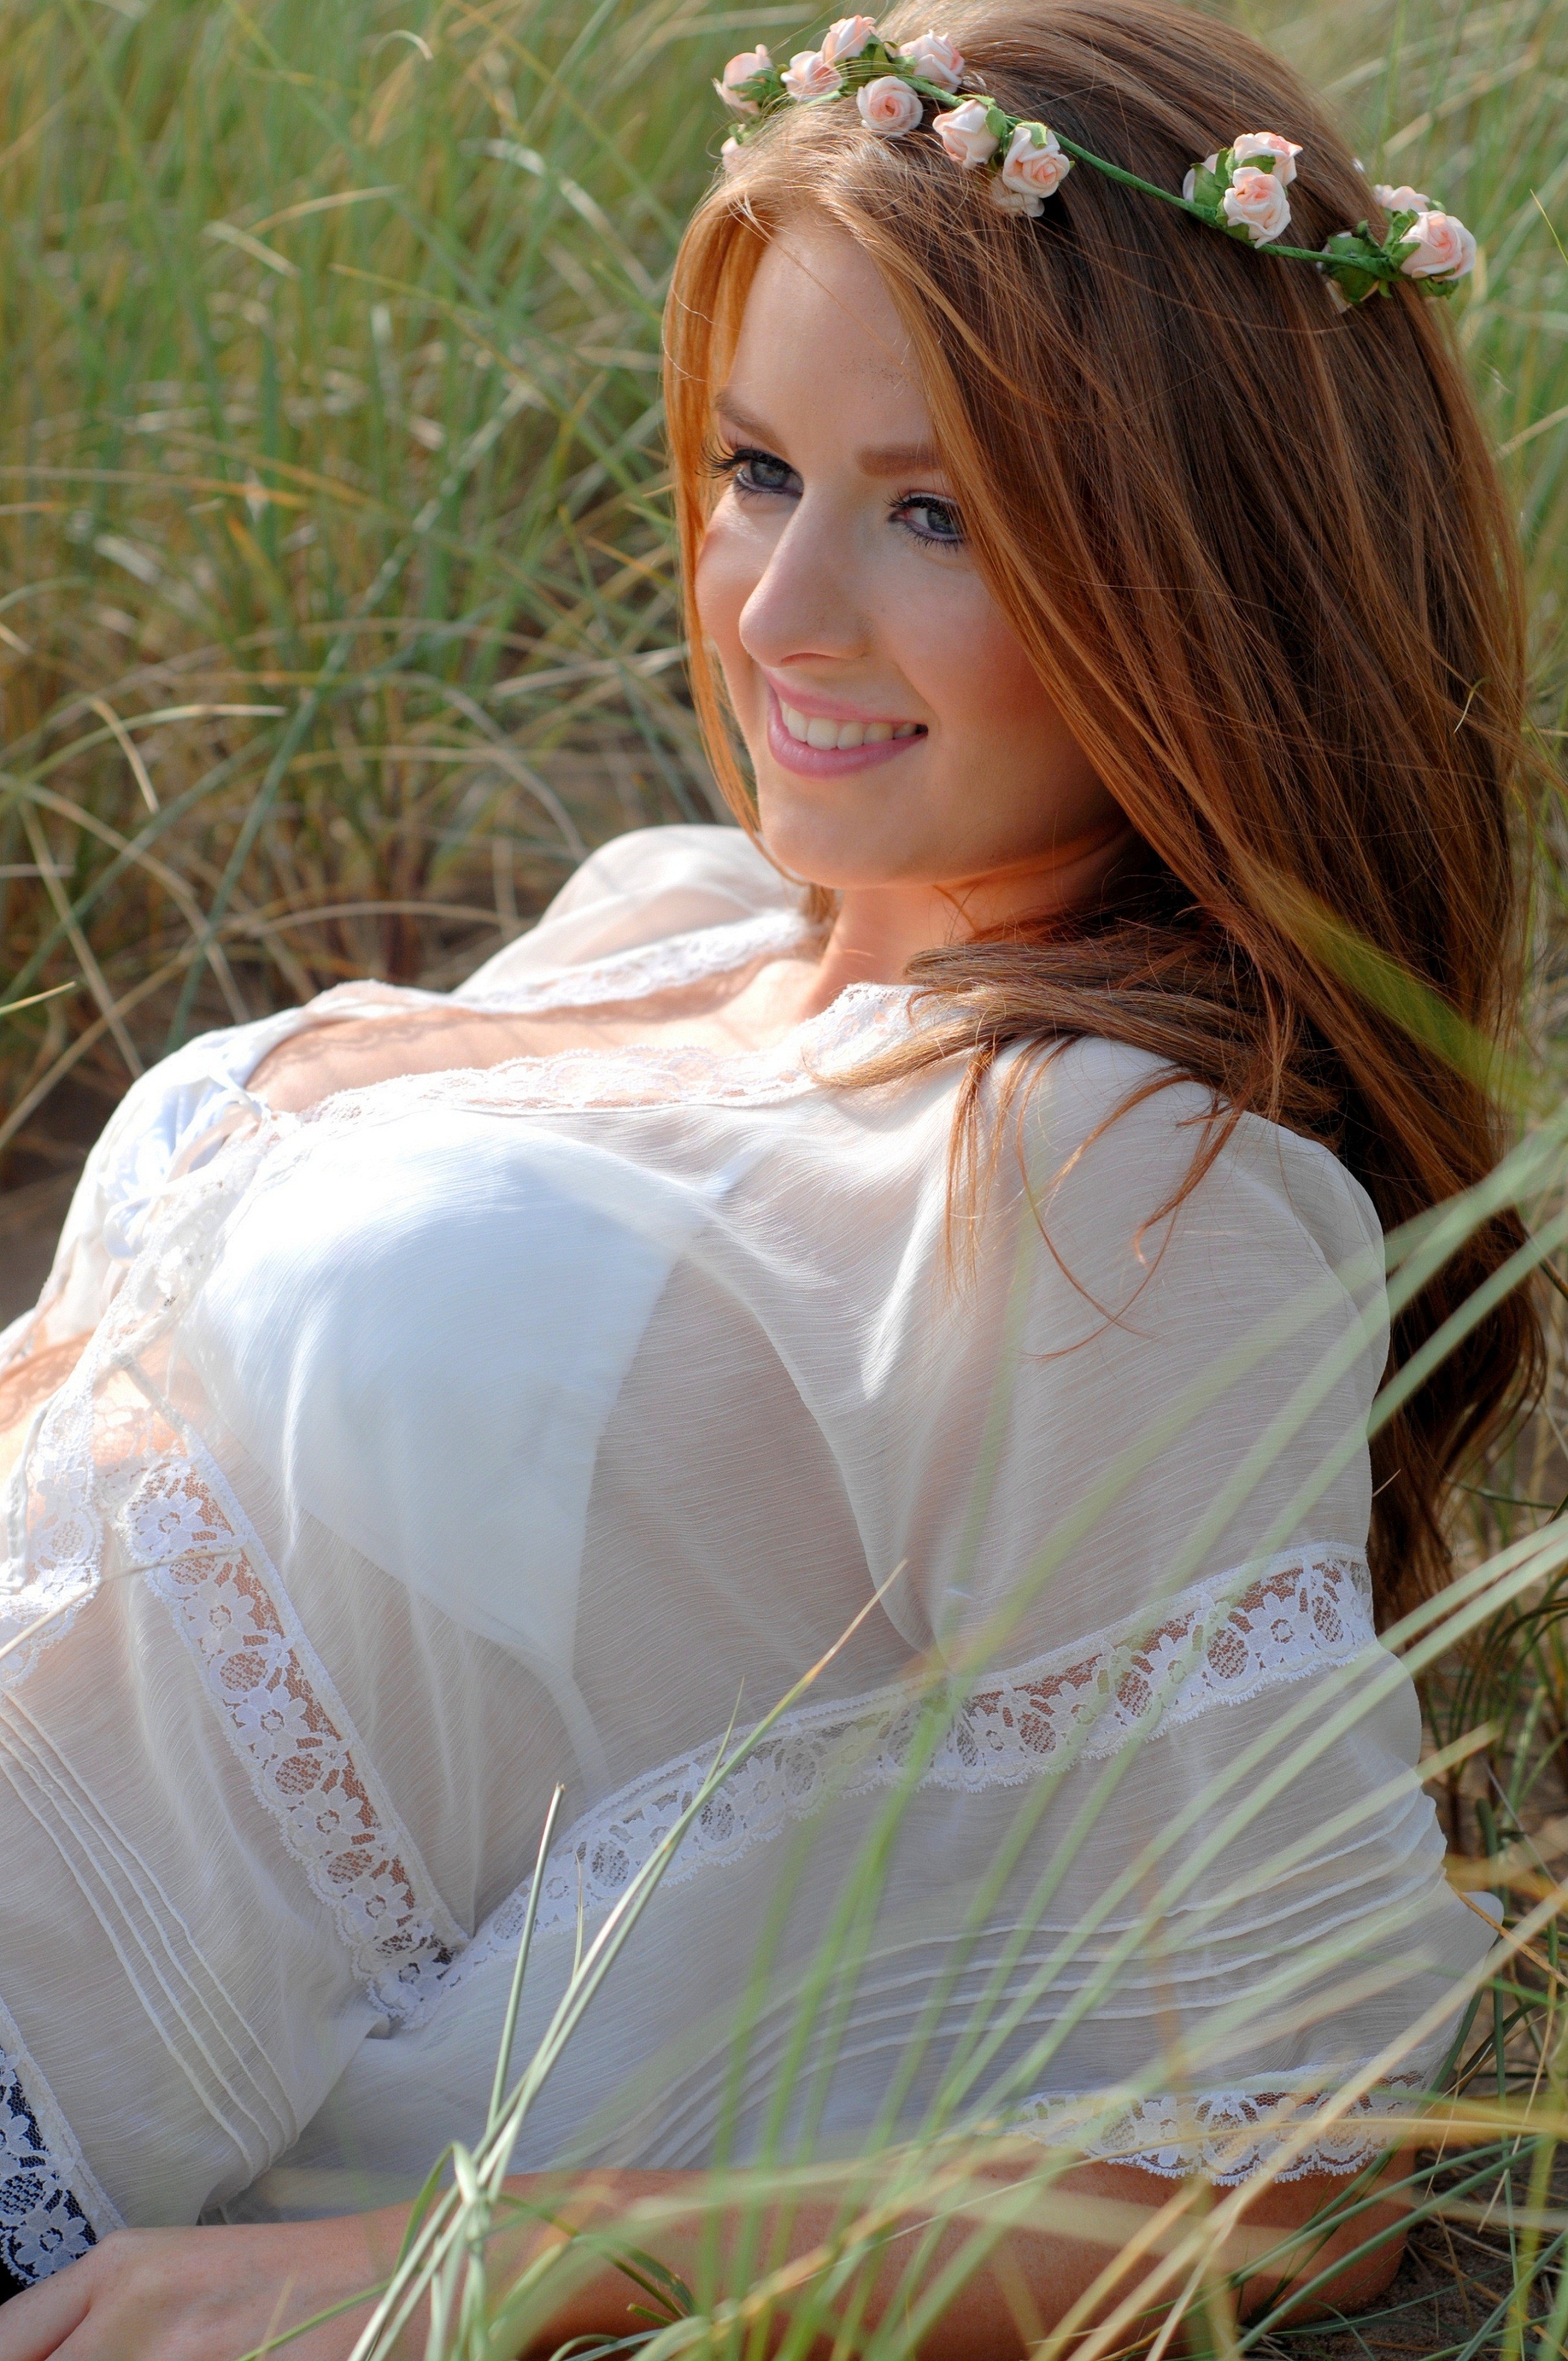 People 2412x3631 women model redhead long hair women outdoors bra see-through clothing blue eyes lying on back ground flower in hair smiling grass blouses nature portrait